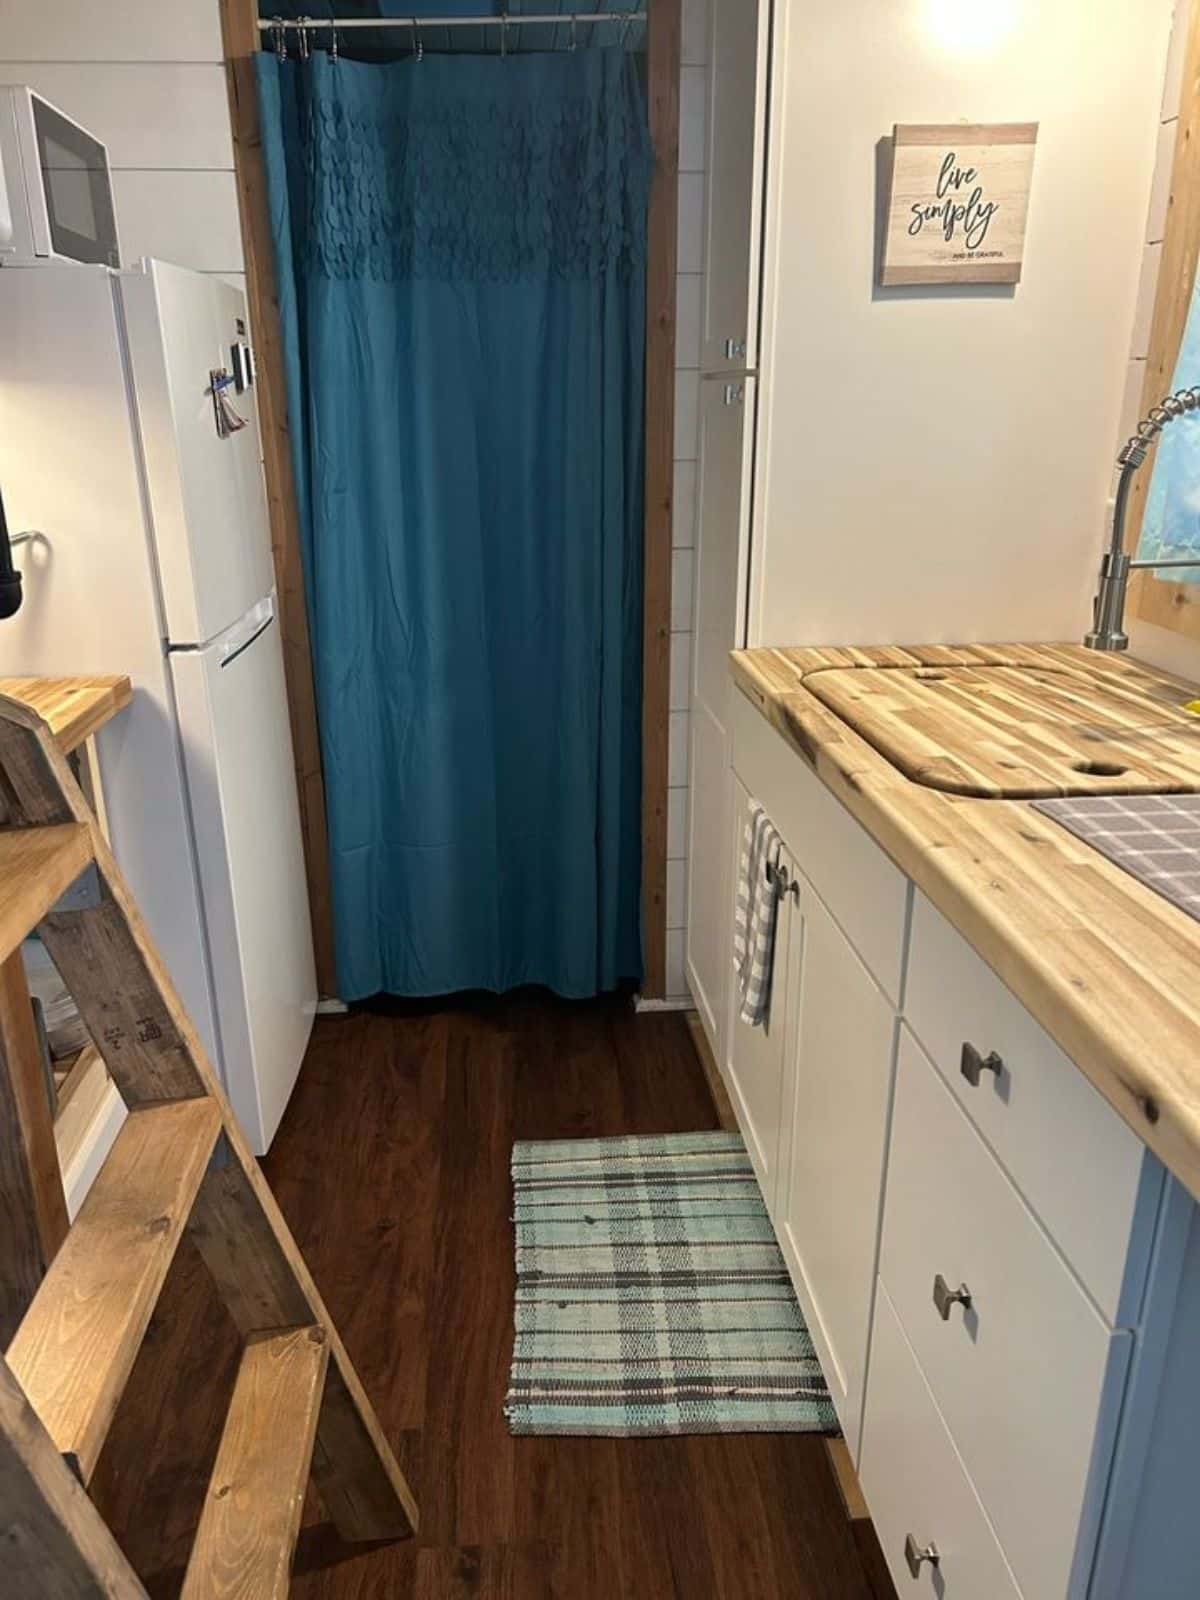 Wooden interiors of affordable 2 bedroom tiny home